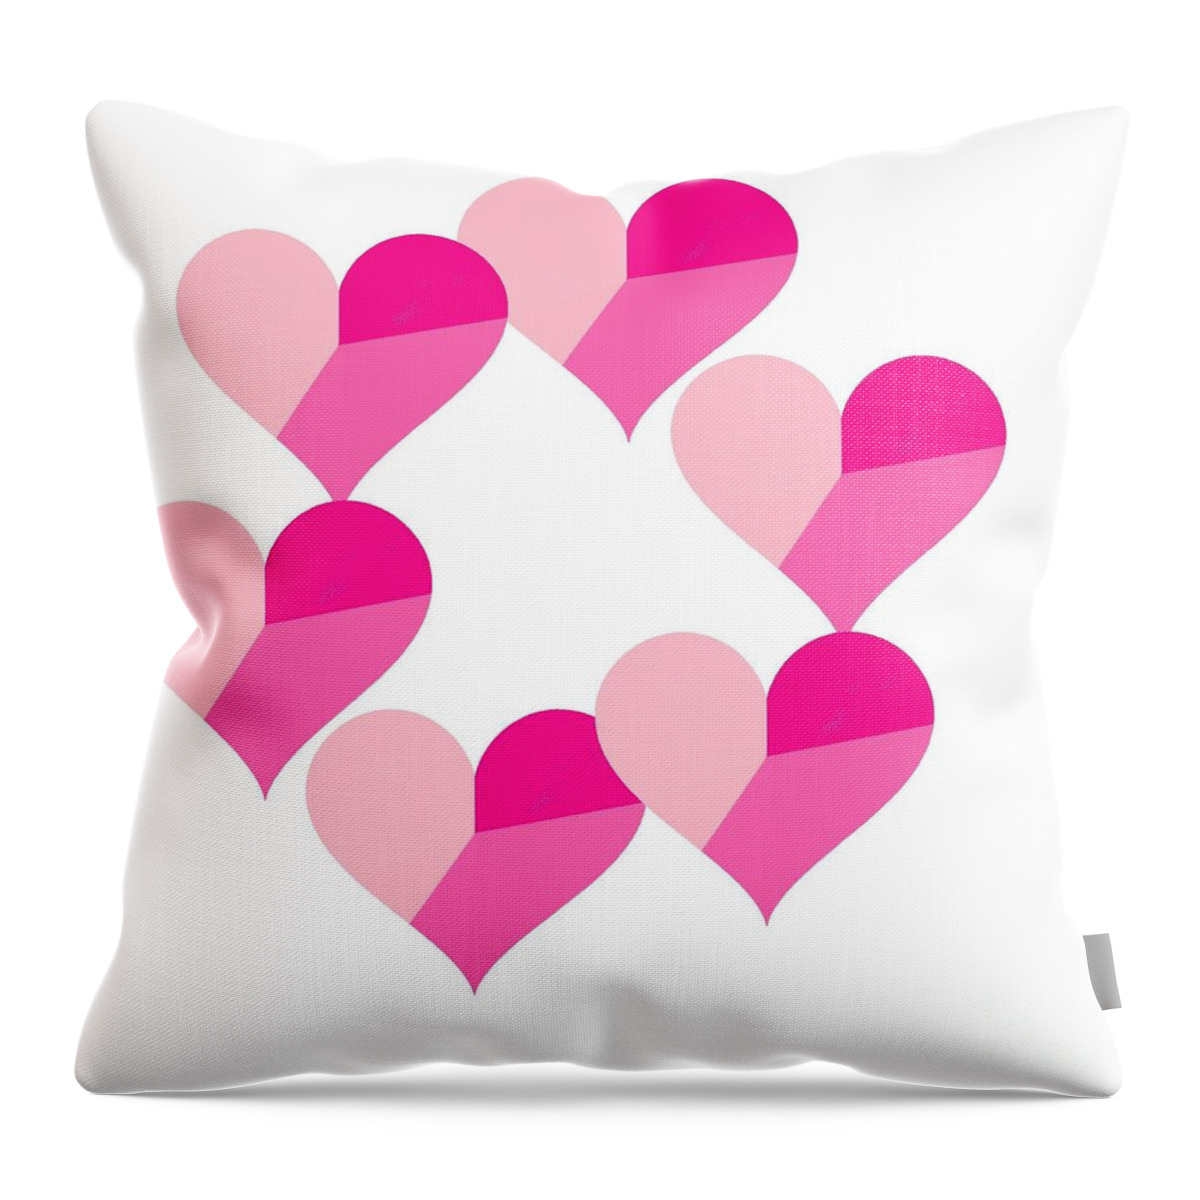 Pink Candy Hearts Throw Pillow featuring the digital art Pink Candy Hearts by Michael Skinner